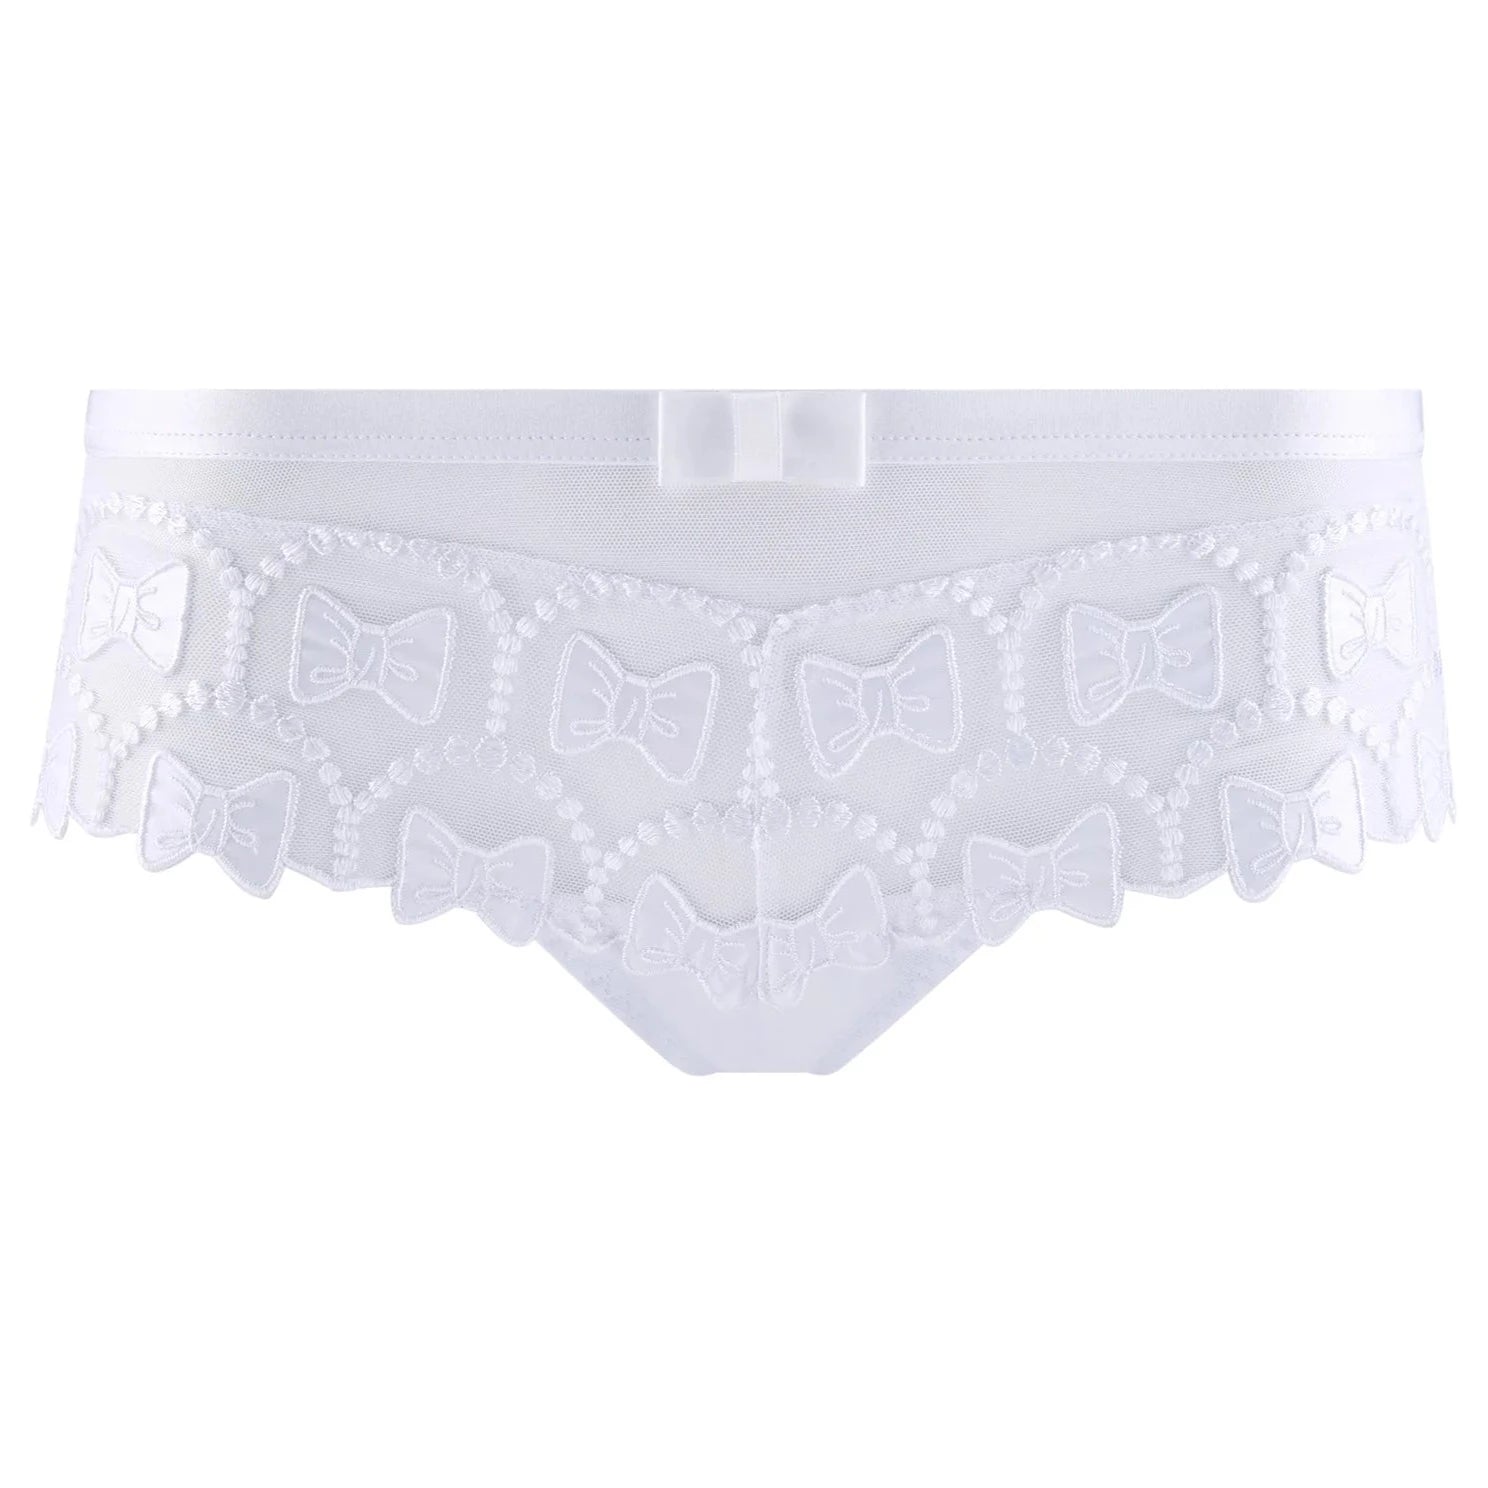 Aubade, VIKTOR&ROLF THE BOW COLLECTION SHORTY | WEISS - Bellizima